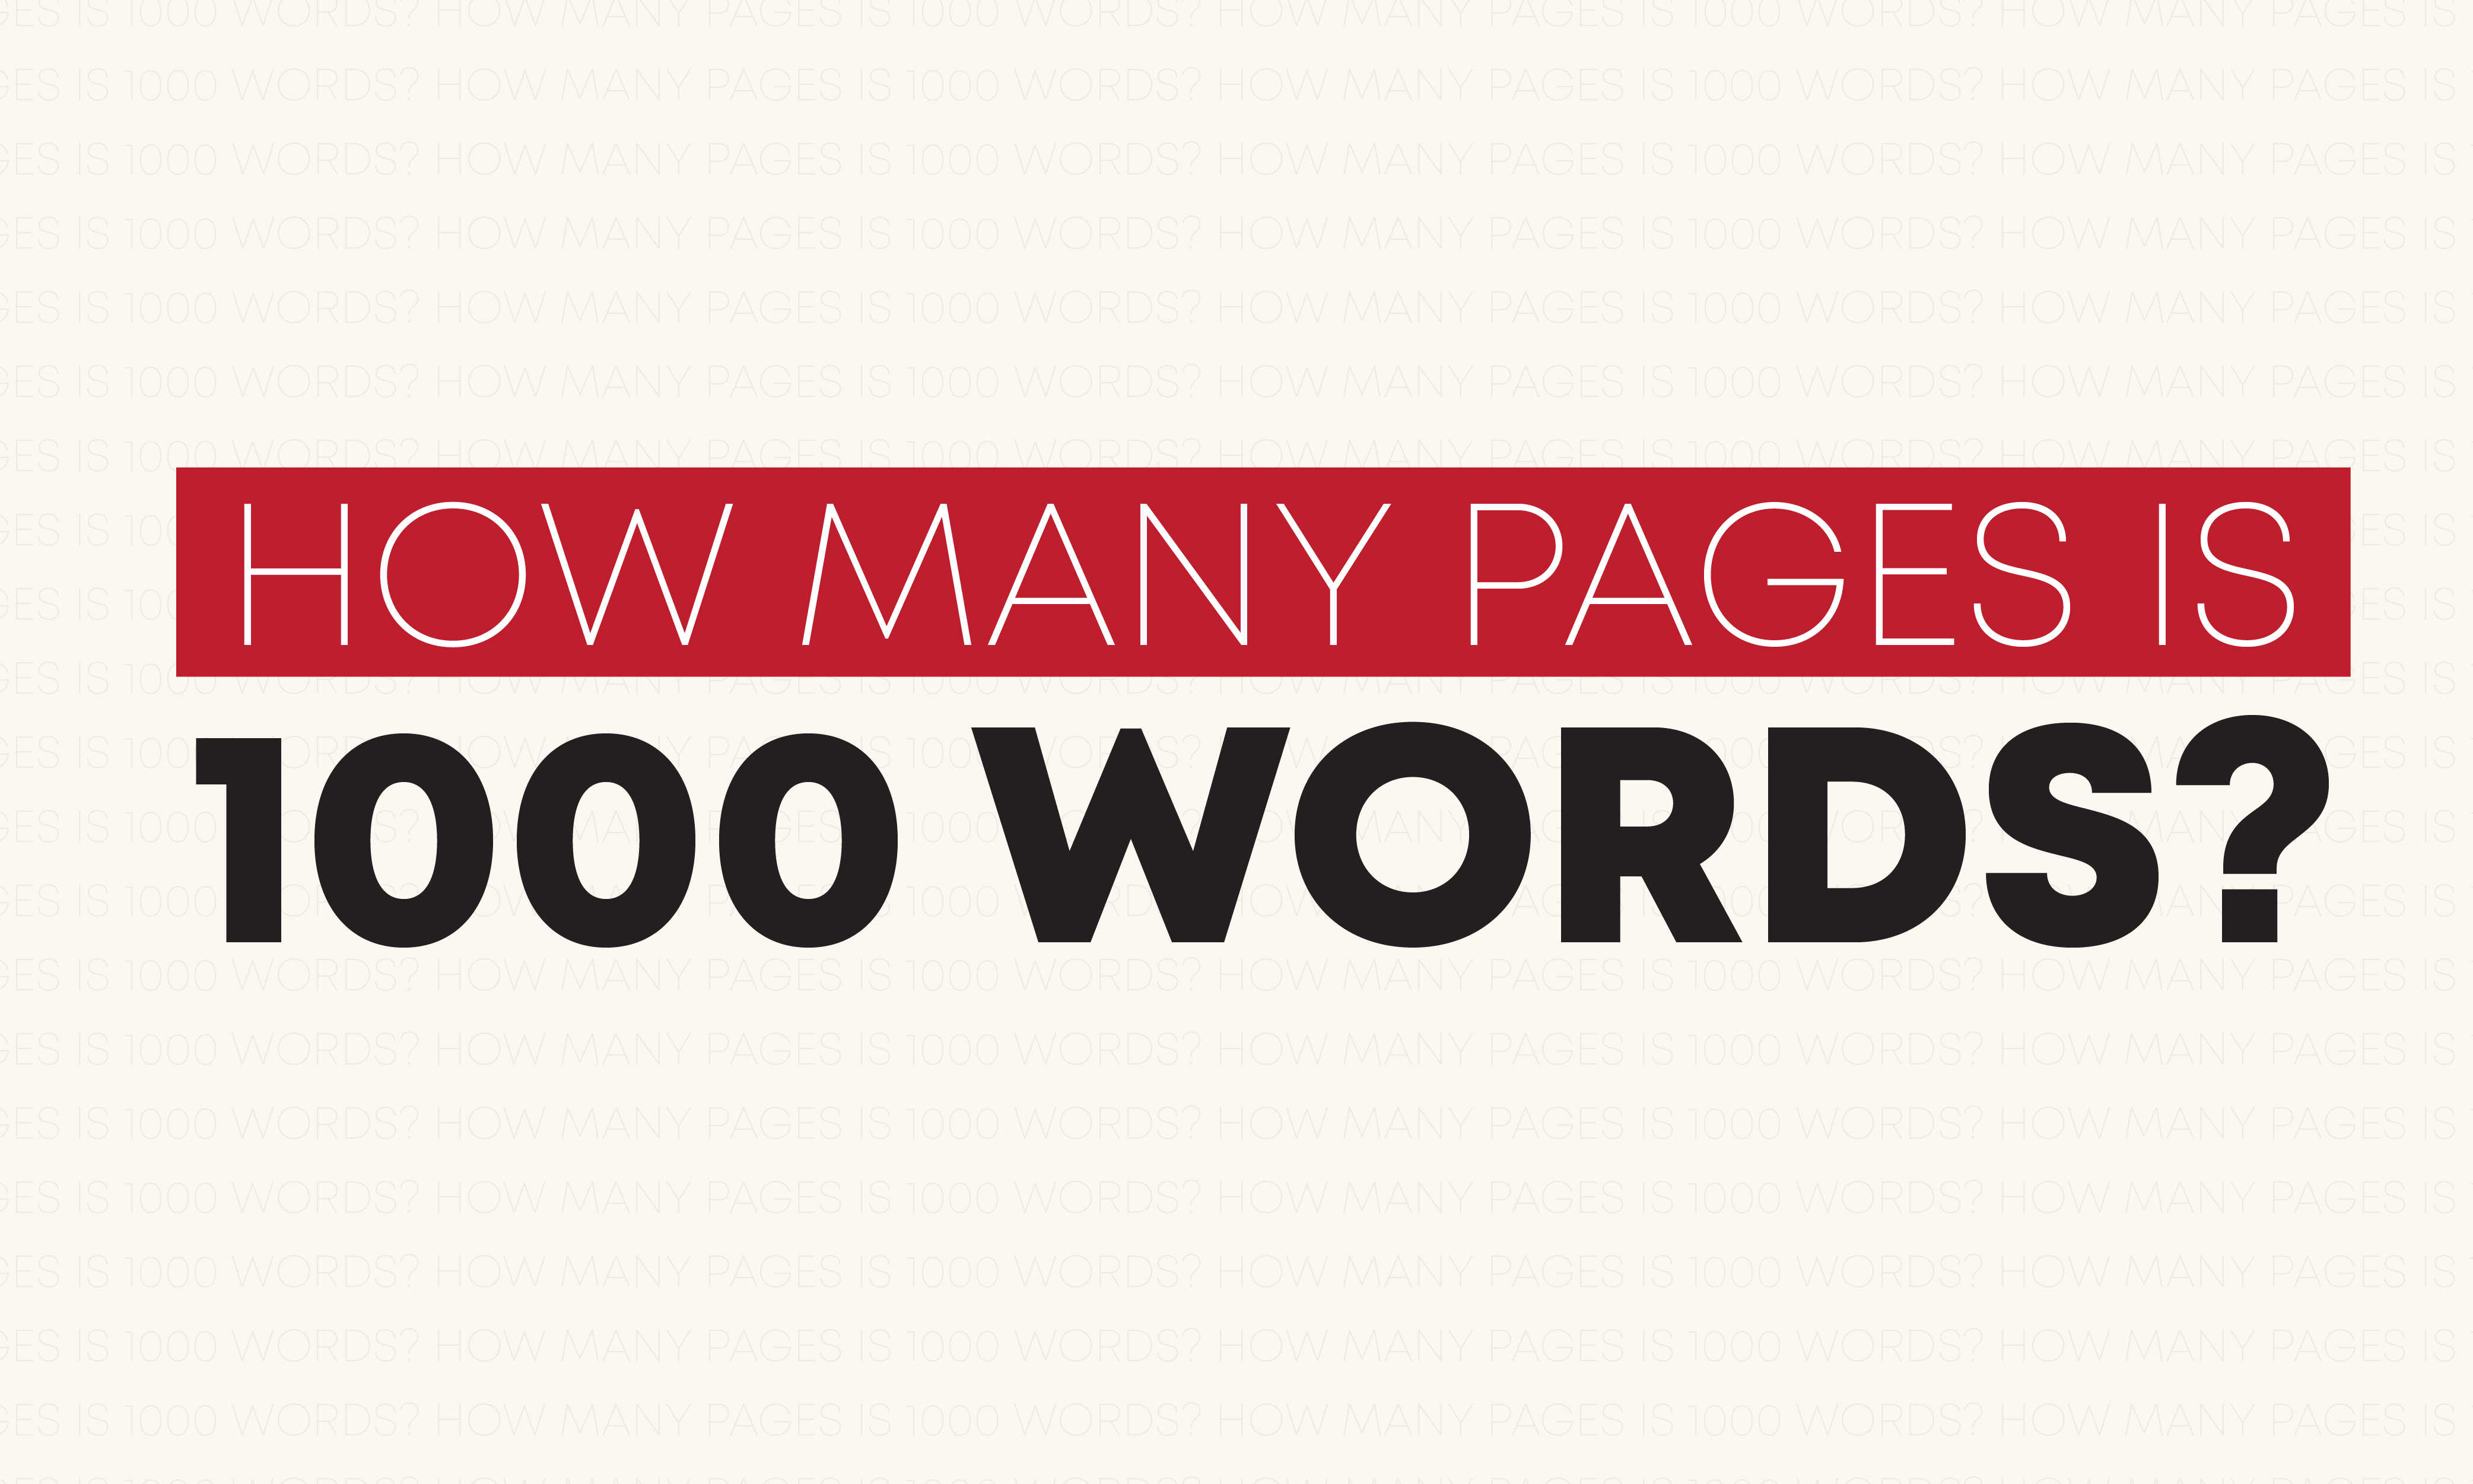 How Many Pages is 1000 Words?